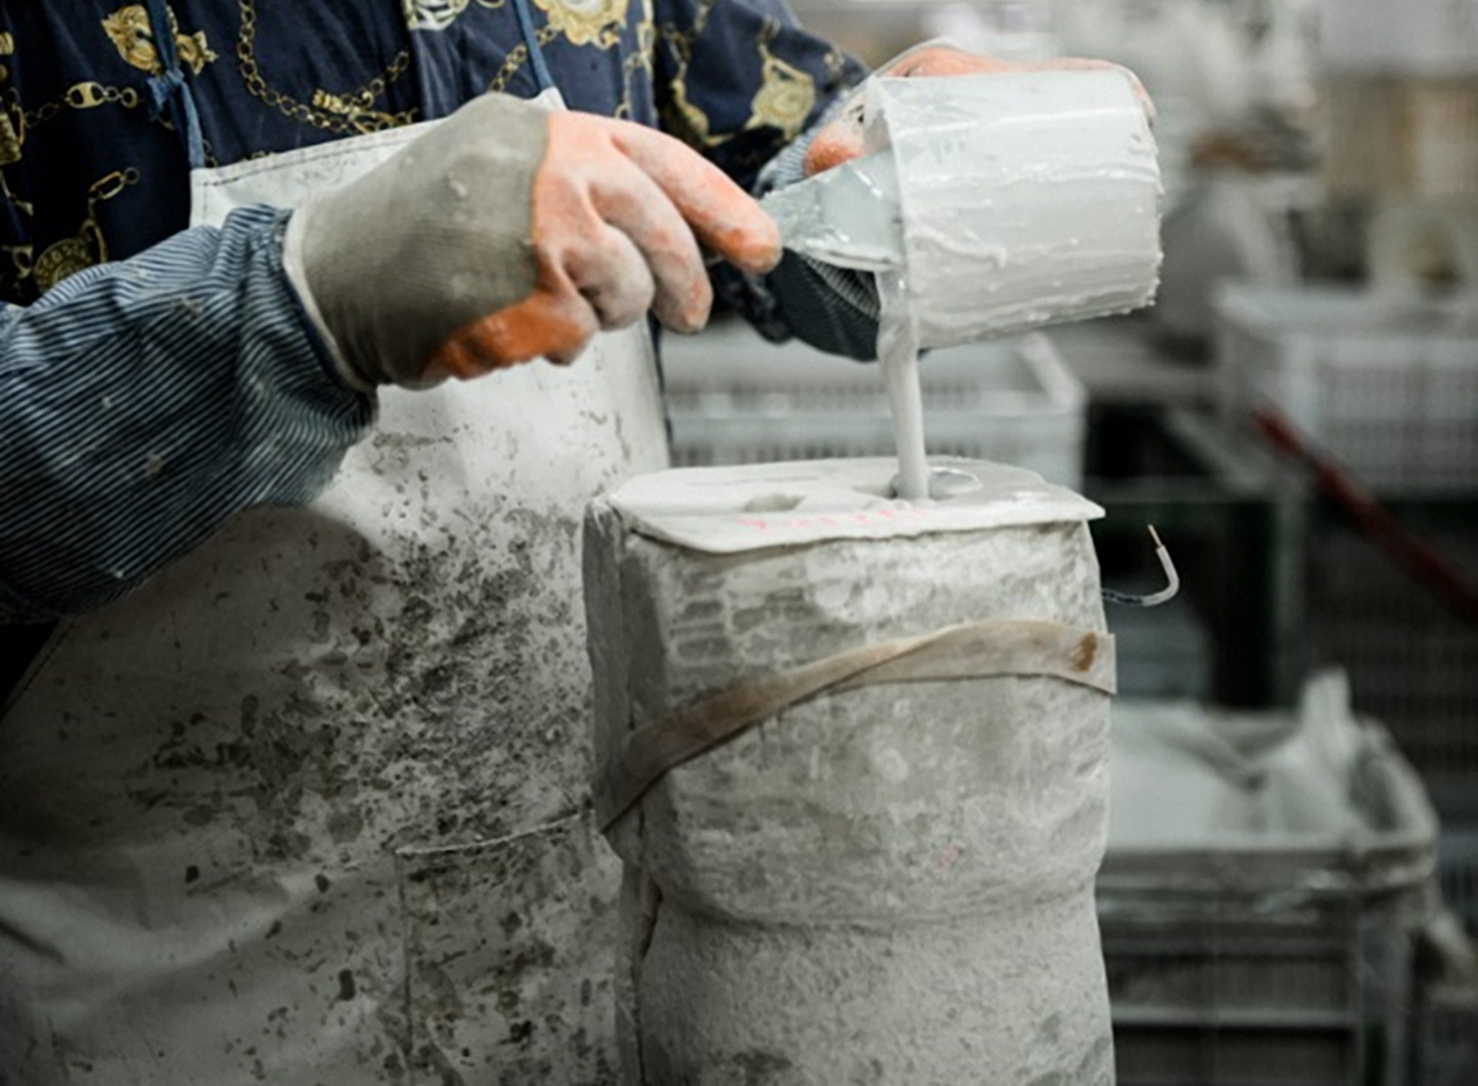 Garden ID-sculpture production Unsaturated polyester resin is poured into the mold.